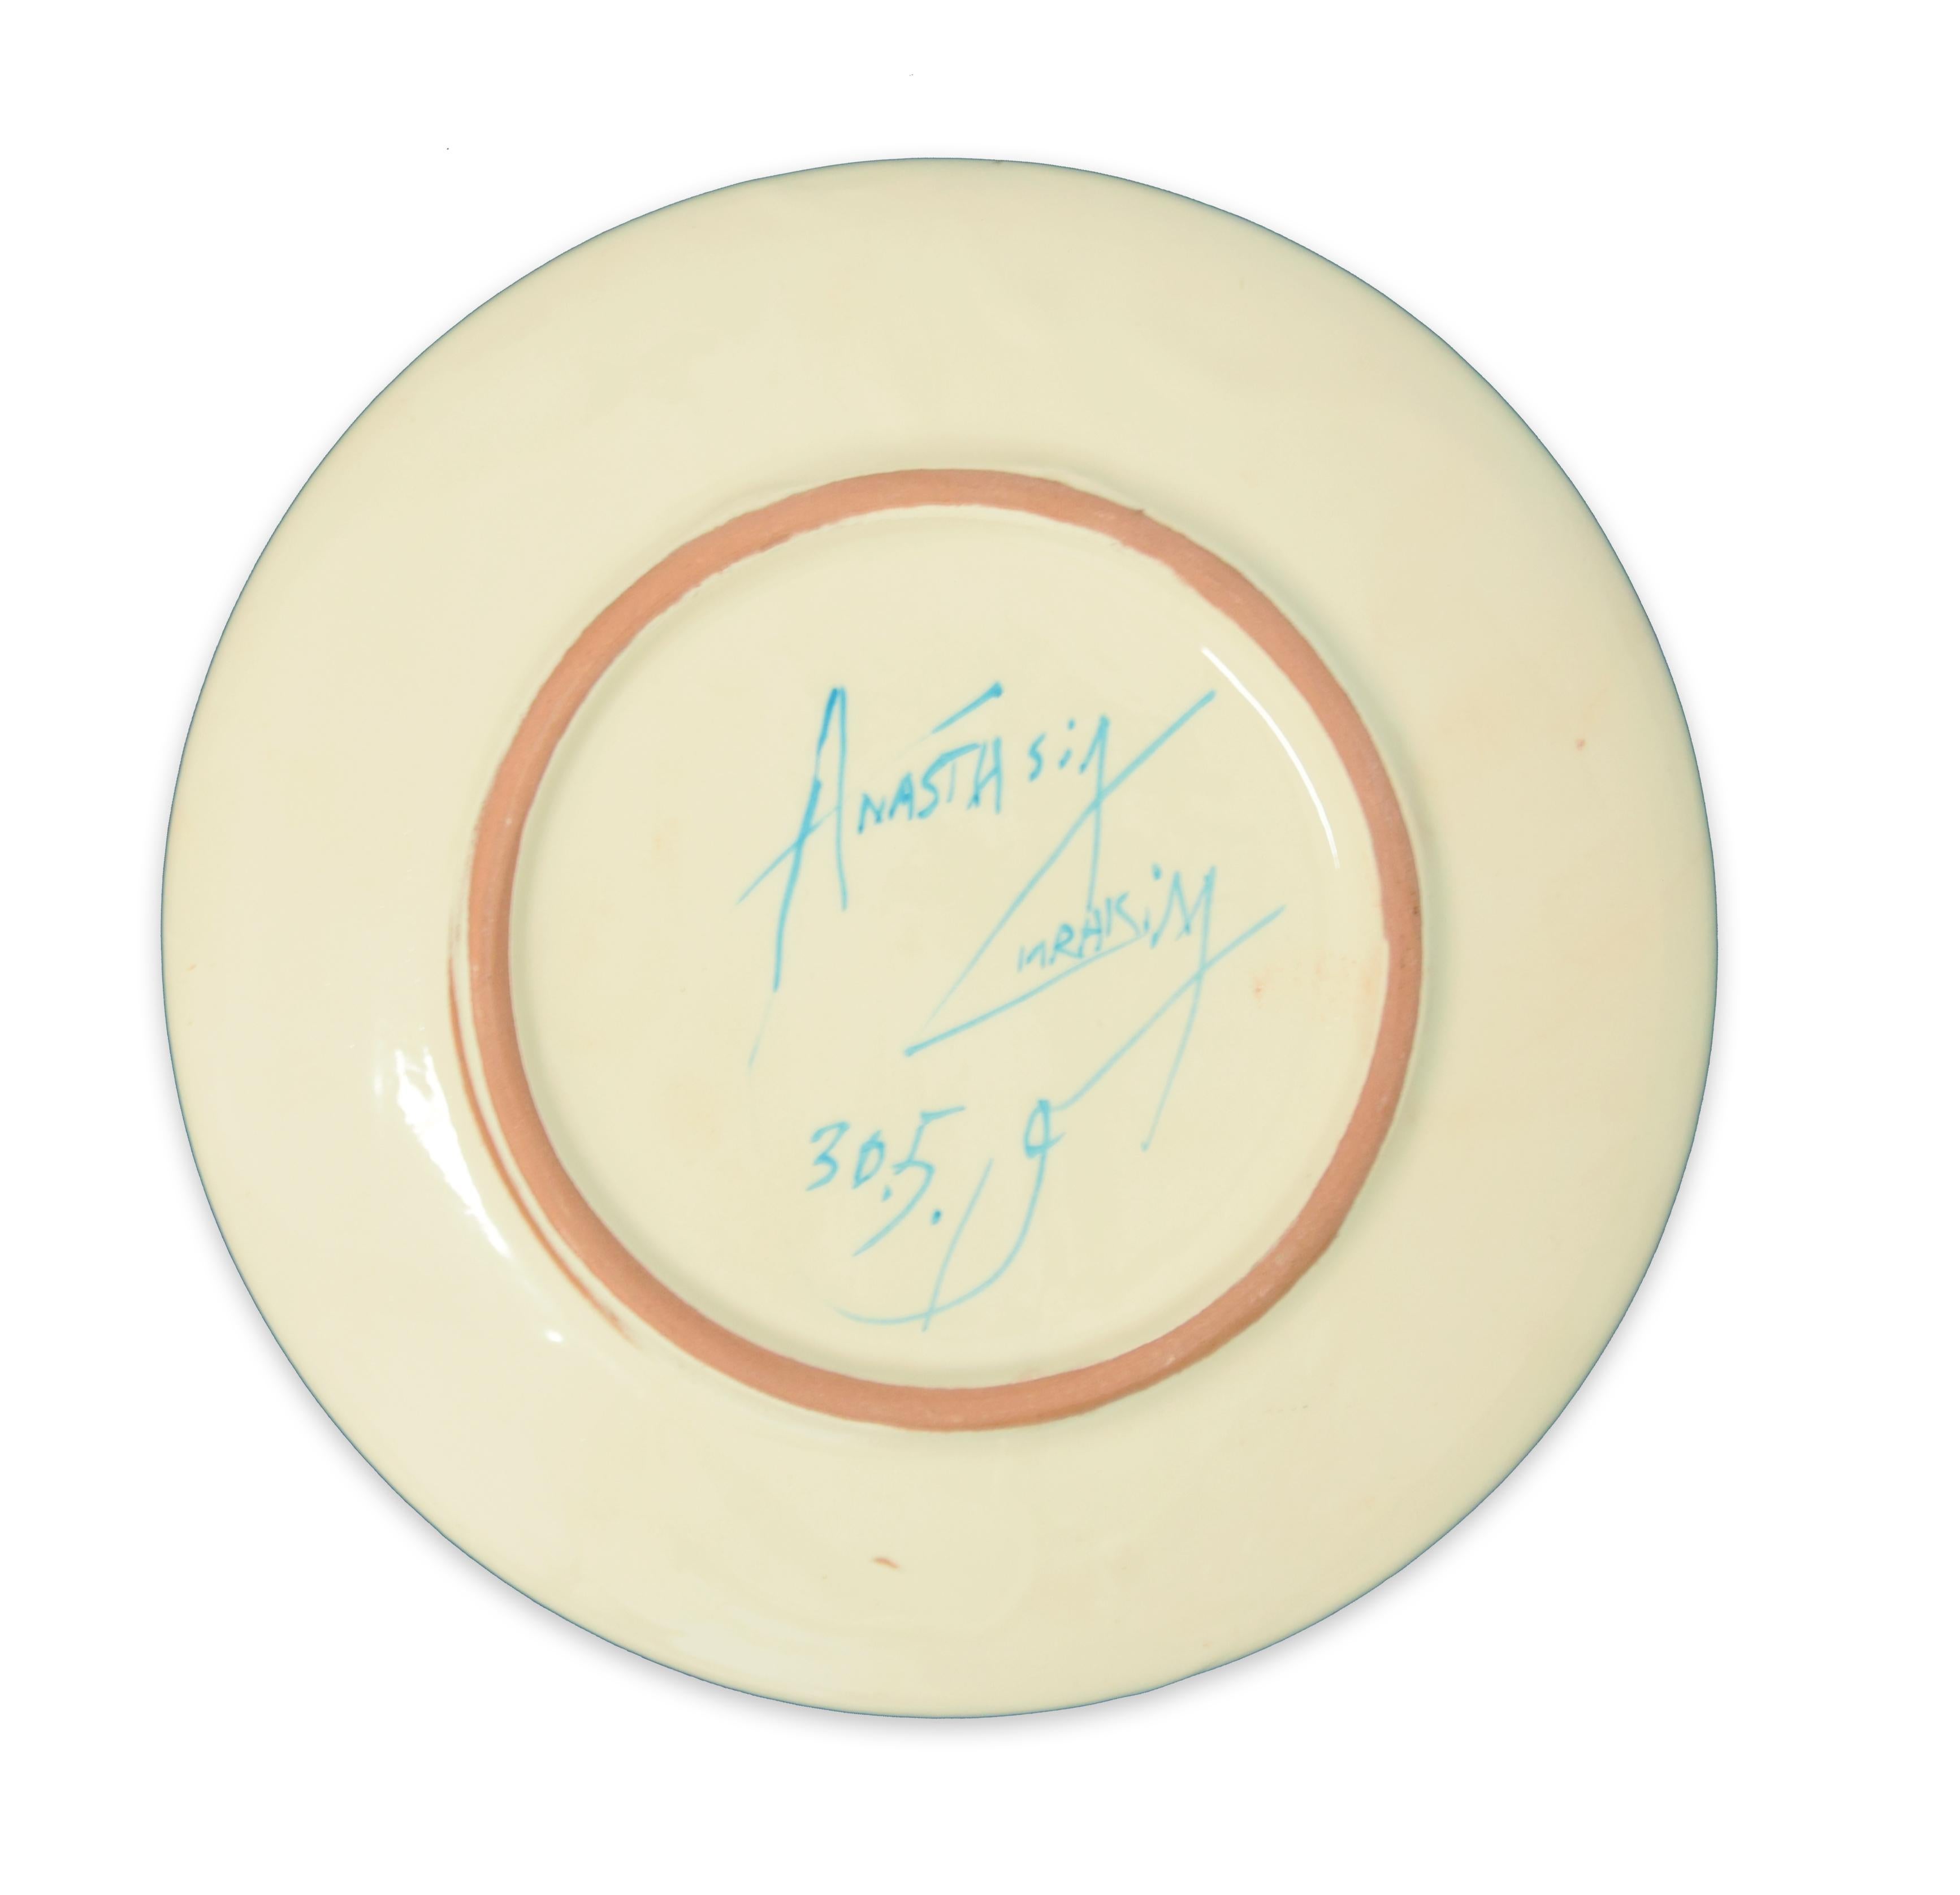 Chinese Man is a hand-made flat ceramic dish realized by the Russian emerging artist, Anastasia Kurakina in 2019. 

Signed and dated on the back at the center.

This is a decorative object, an artist's dish to show and a functional object to put on